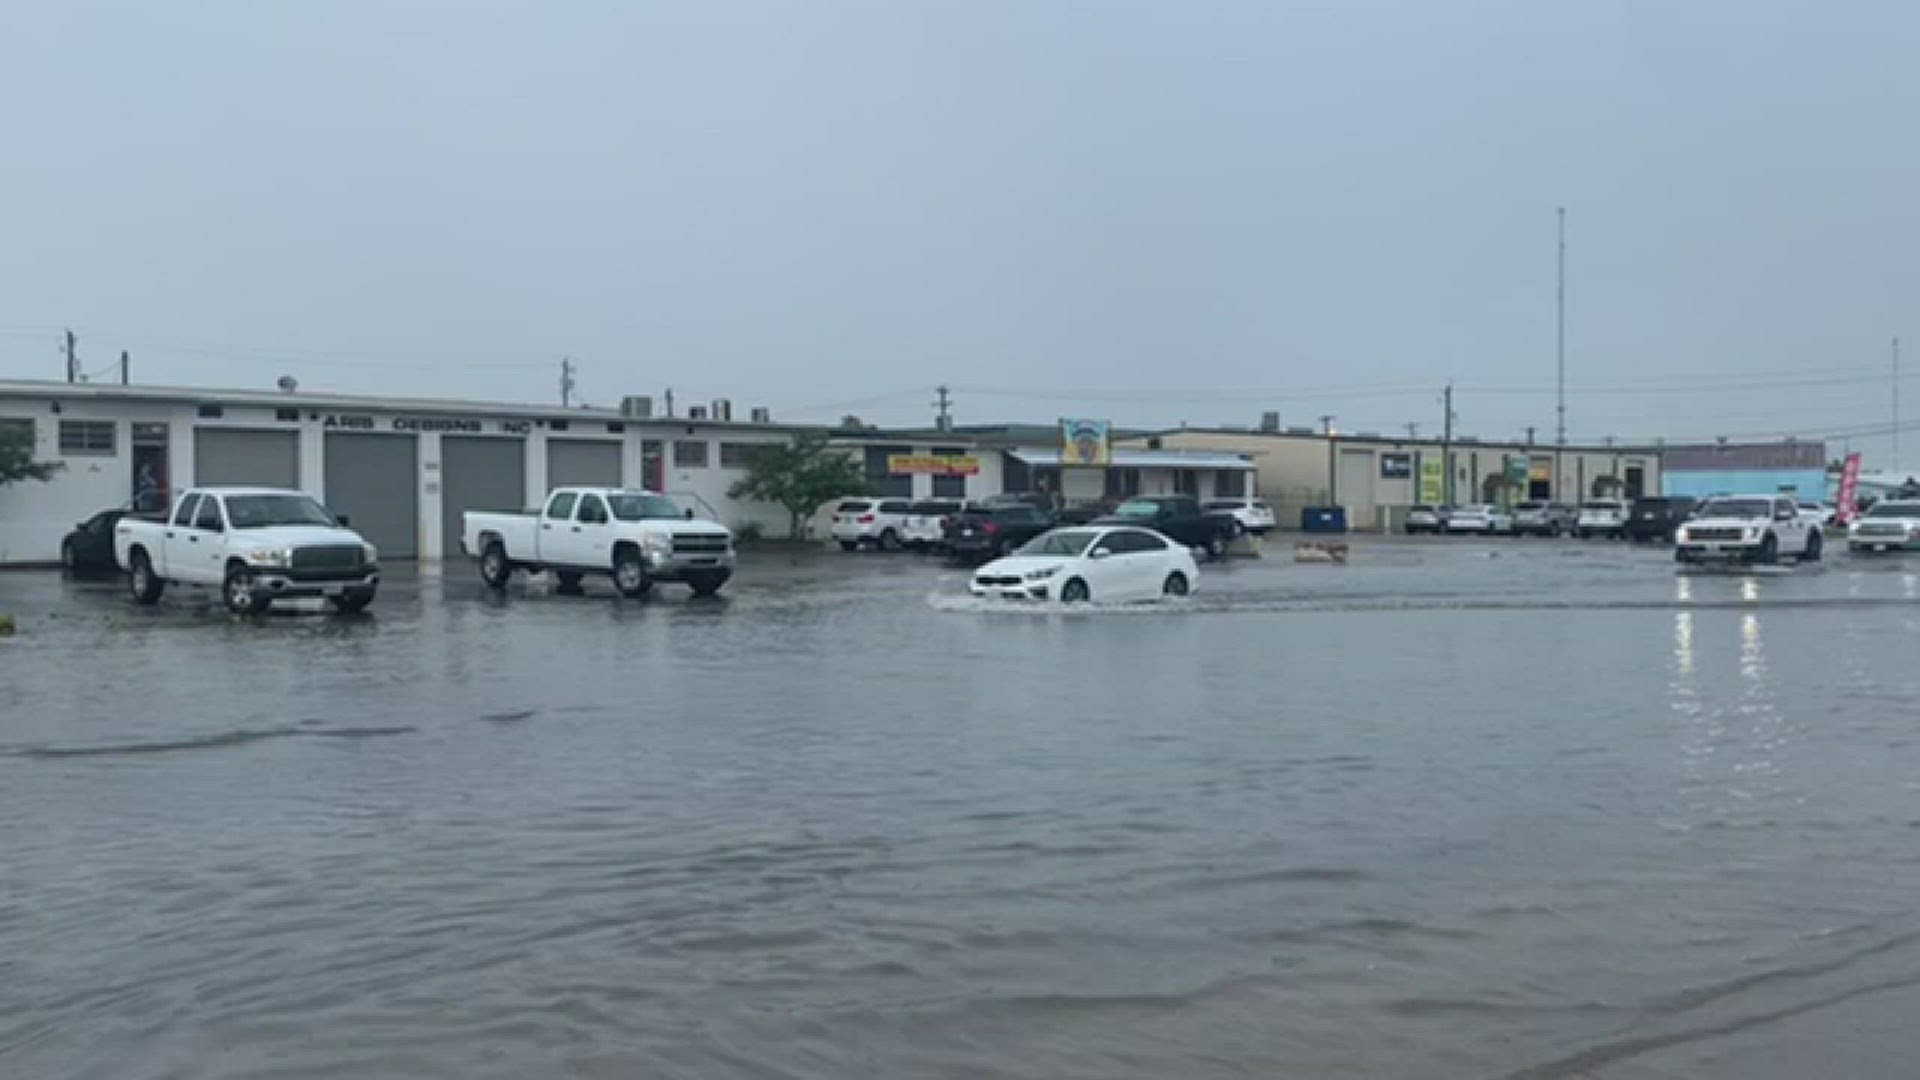 Heavy rainfall in Corpus Christi caused several areas of high water, including on the 4500 block of Baldwin.